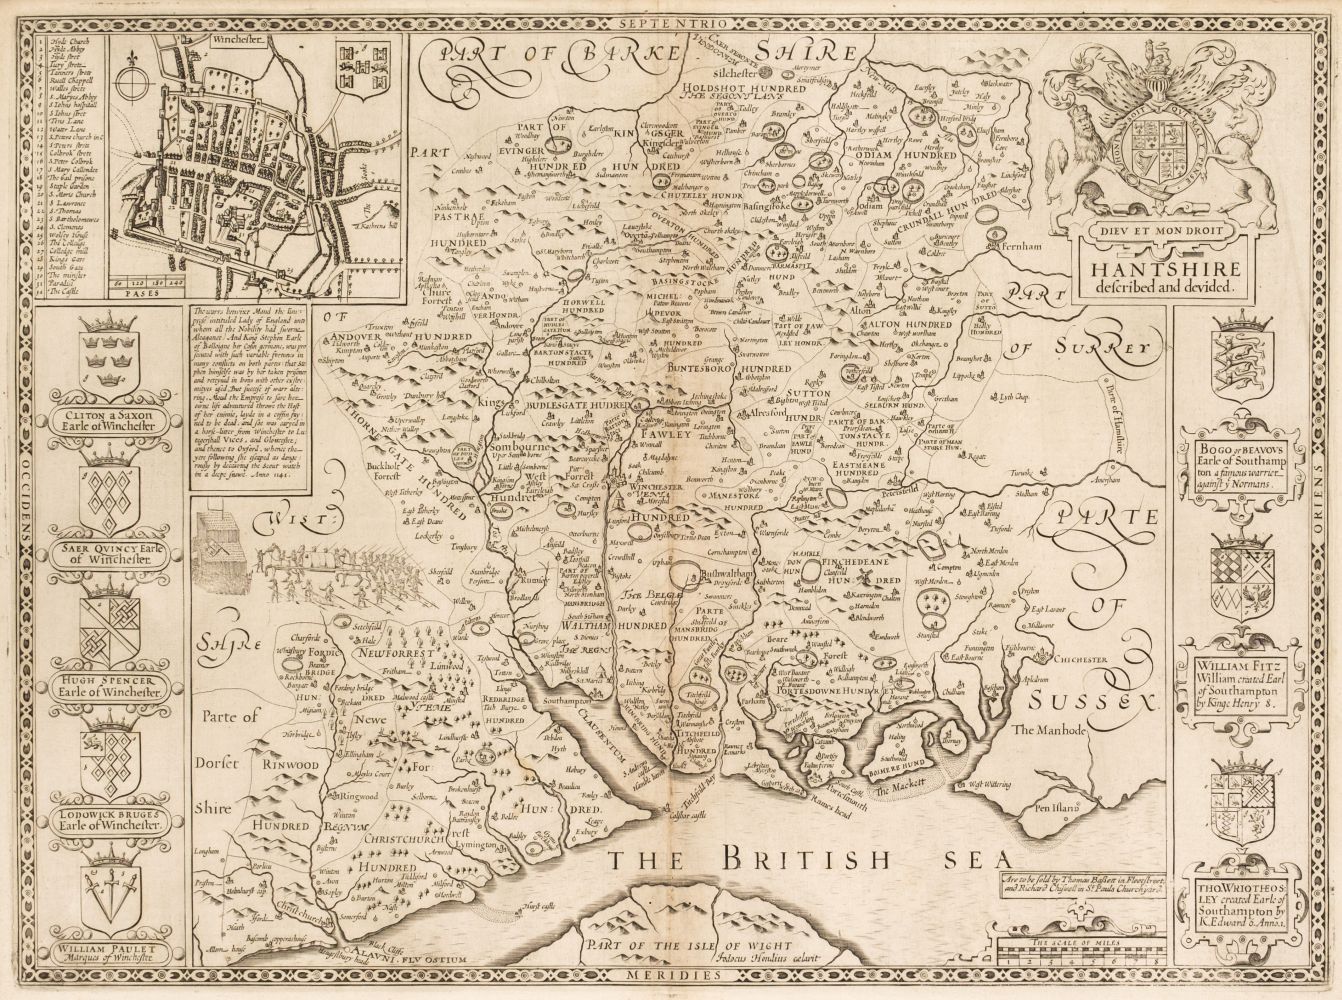 Hampshire. Speed (John), Hantshire described and devided, Thomas Bassett & Richard Chiswell, 1676